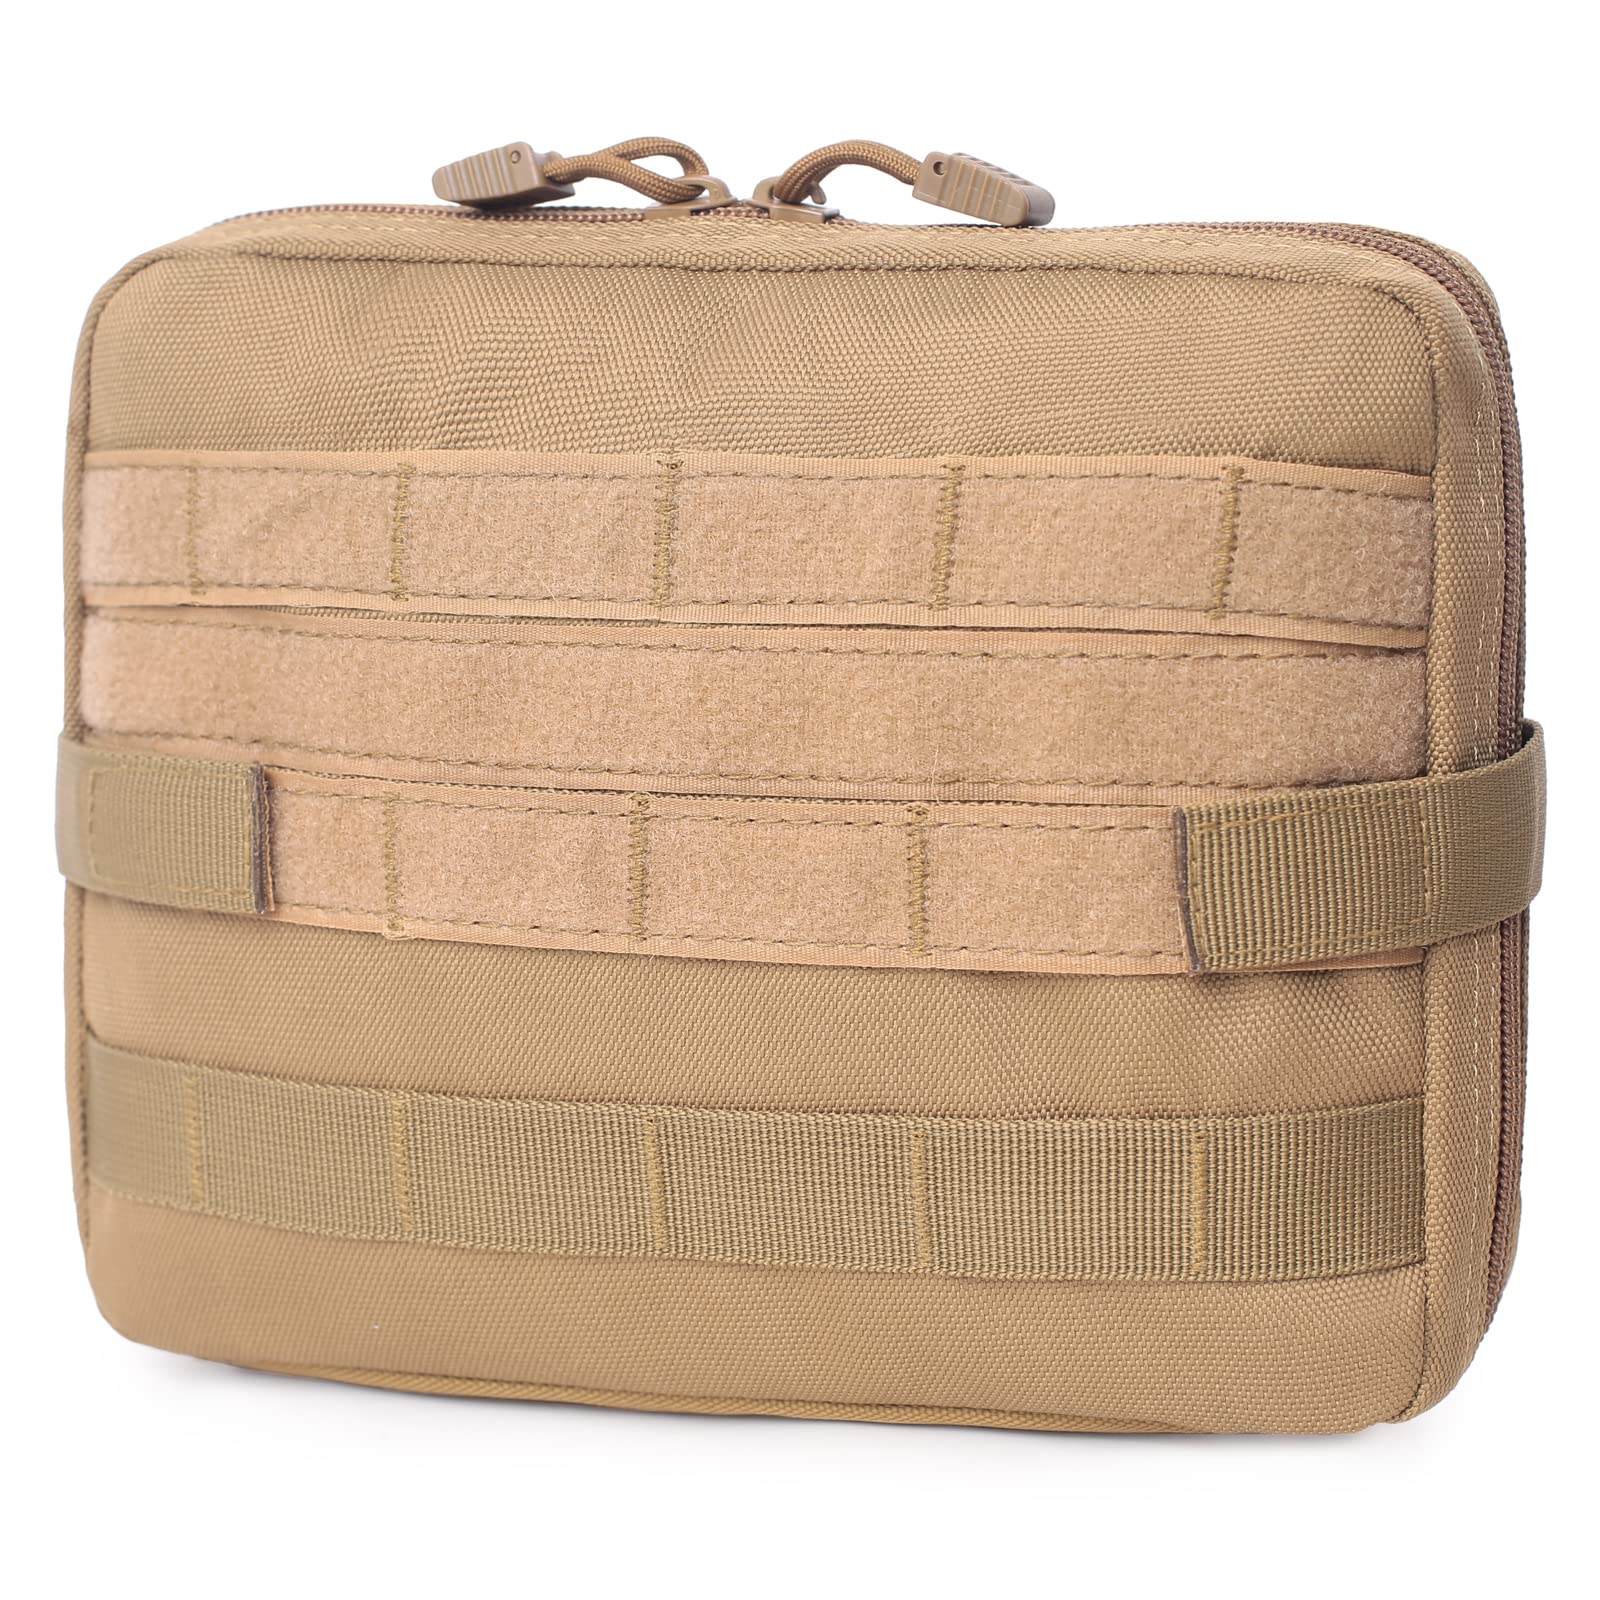 TRIWONDER Tactical Admin Molle Pouch Compact Utility Gadget Gear Tool Bag EDC Pouch Military EMT Organizer (Tan)